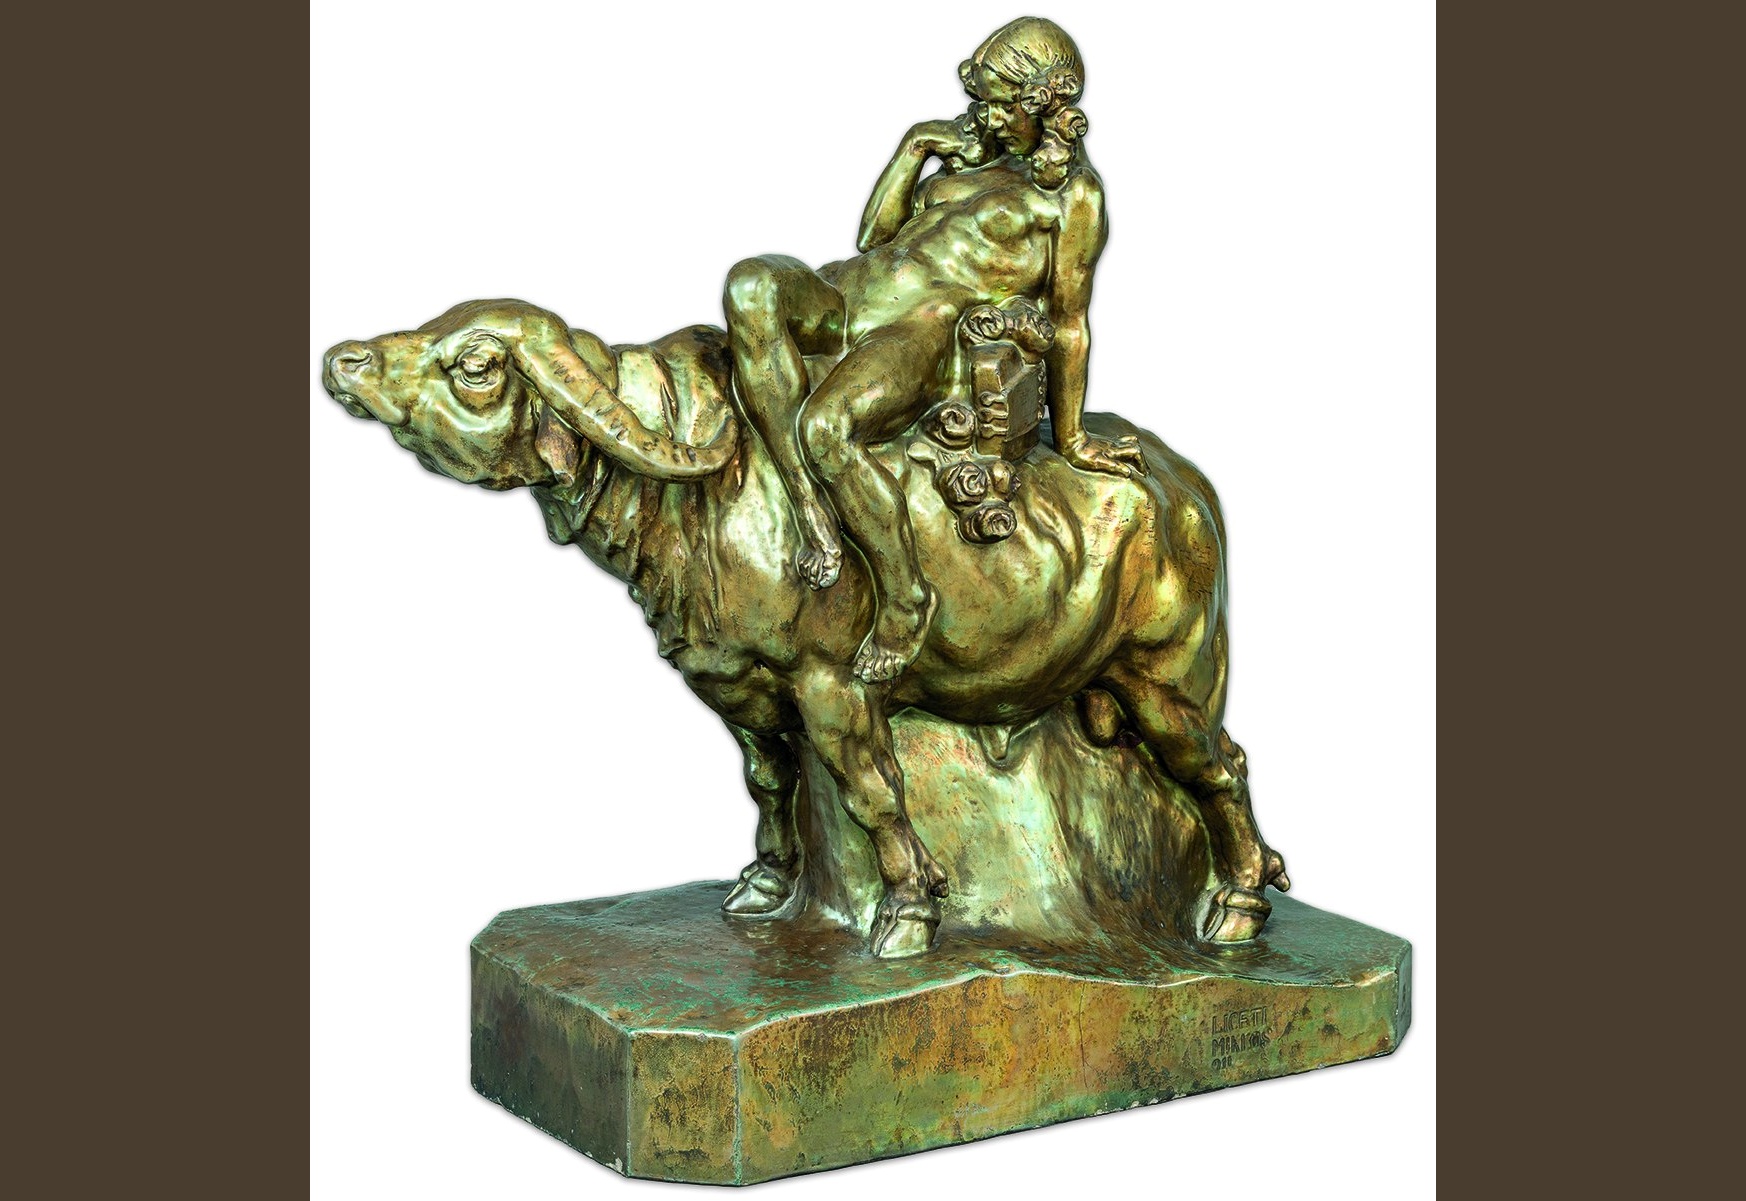 Unique Zsolnay Sculpture Could be Auctioned for an Incredible Price [Video]